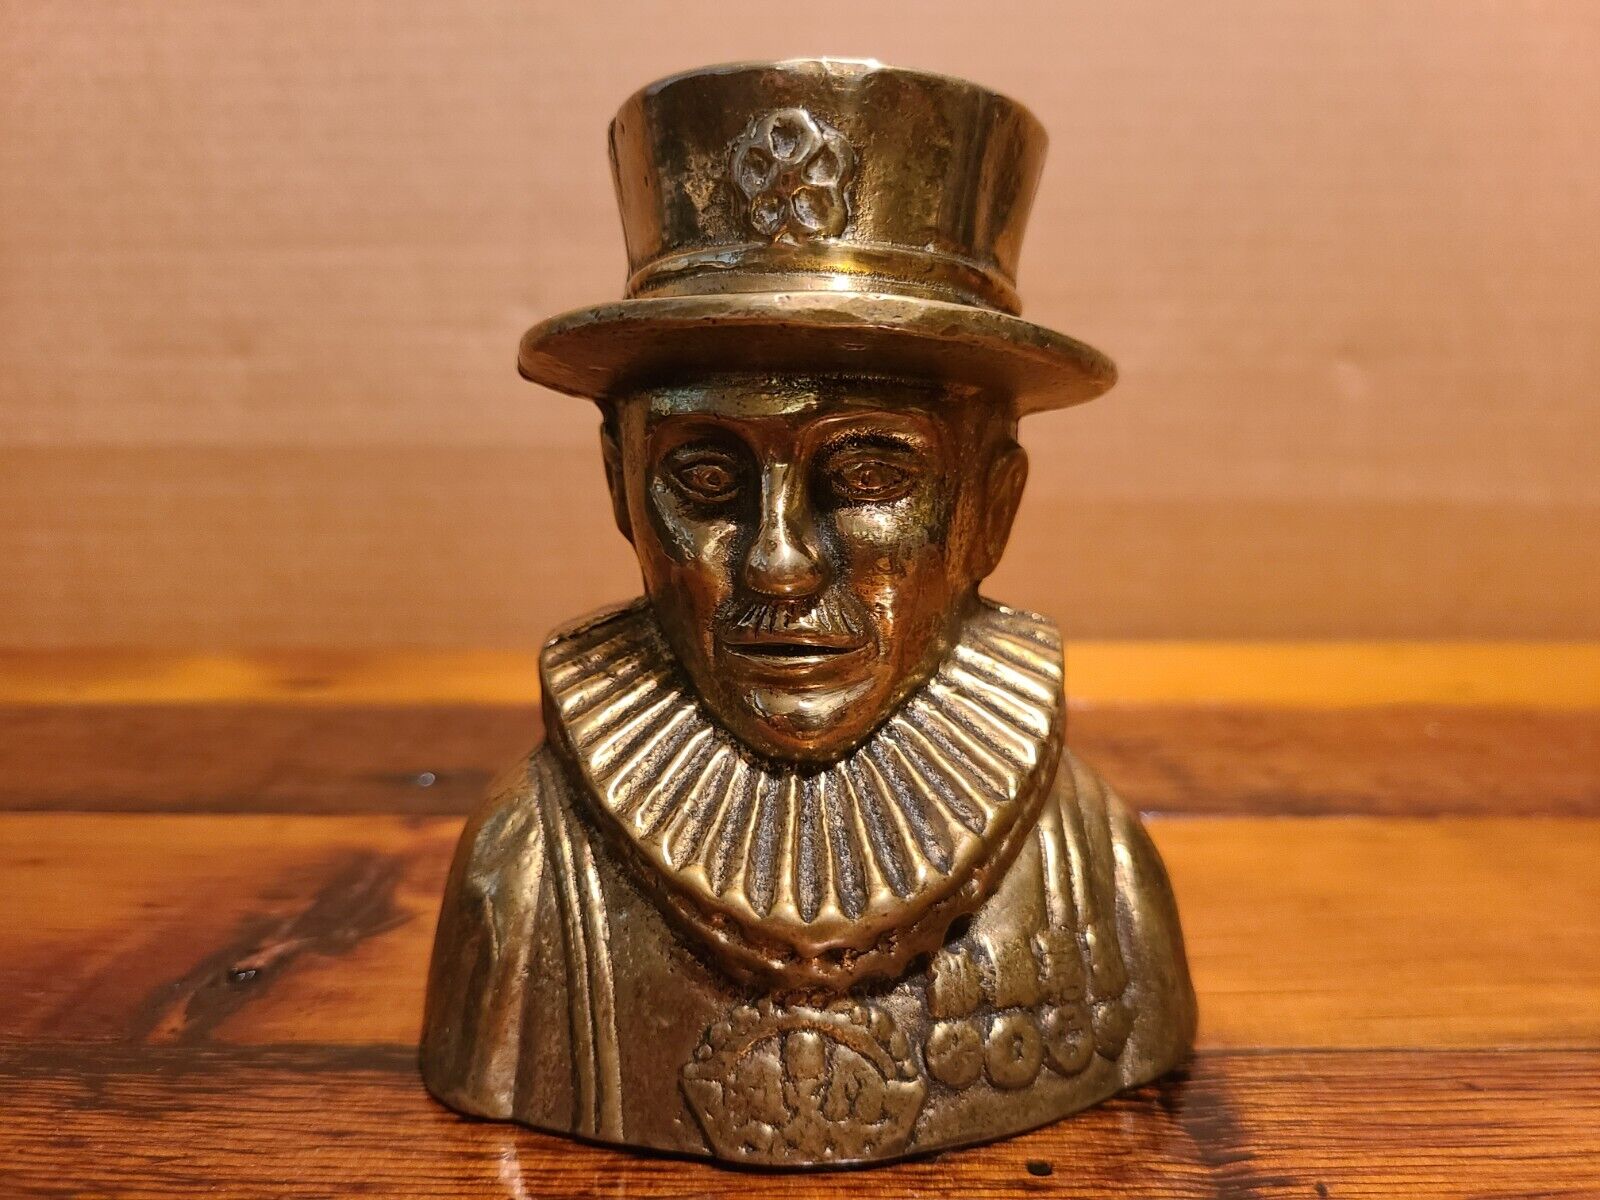 Vintage Brass Beefeater Yeoman Coin Bank - England - Solid Brass